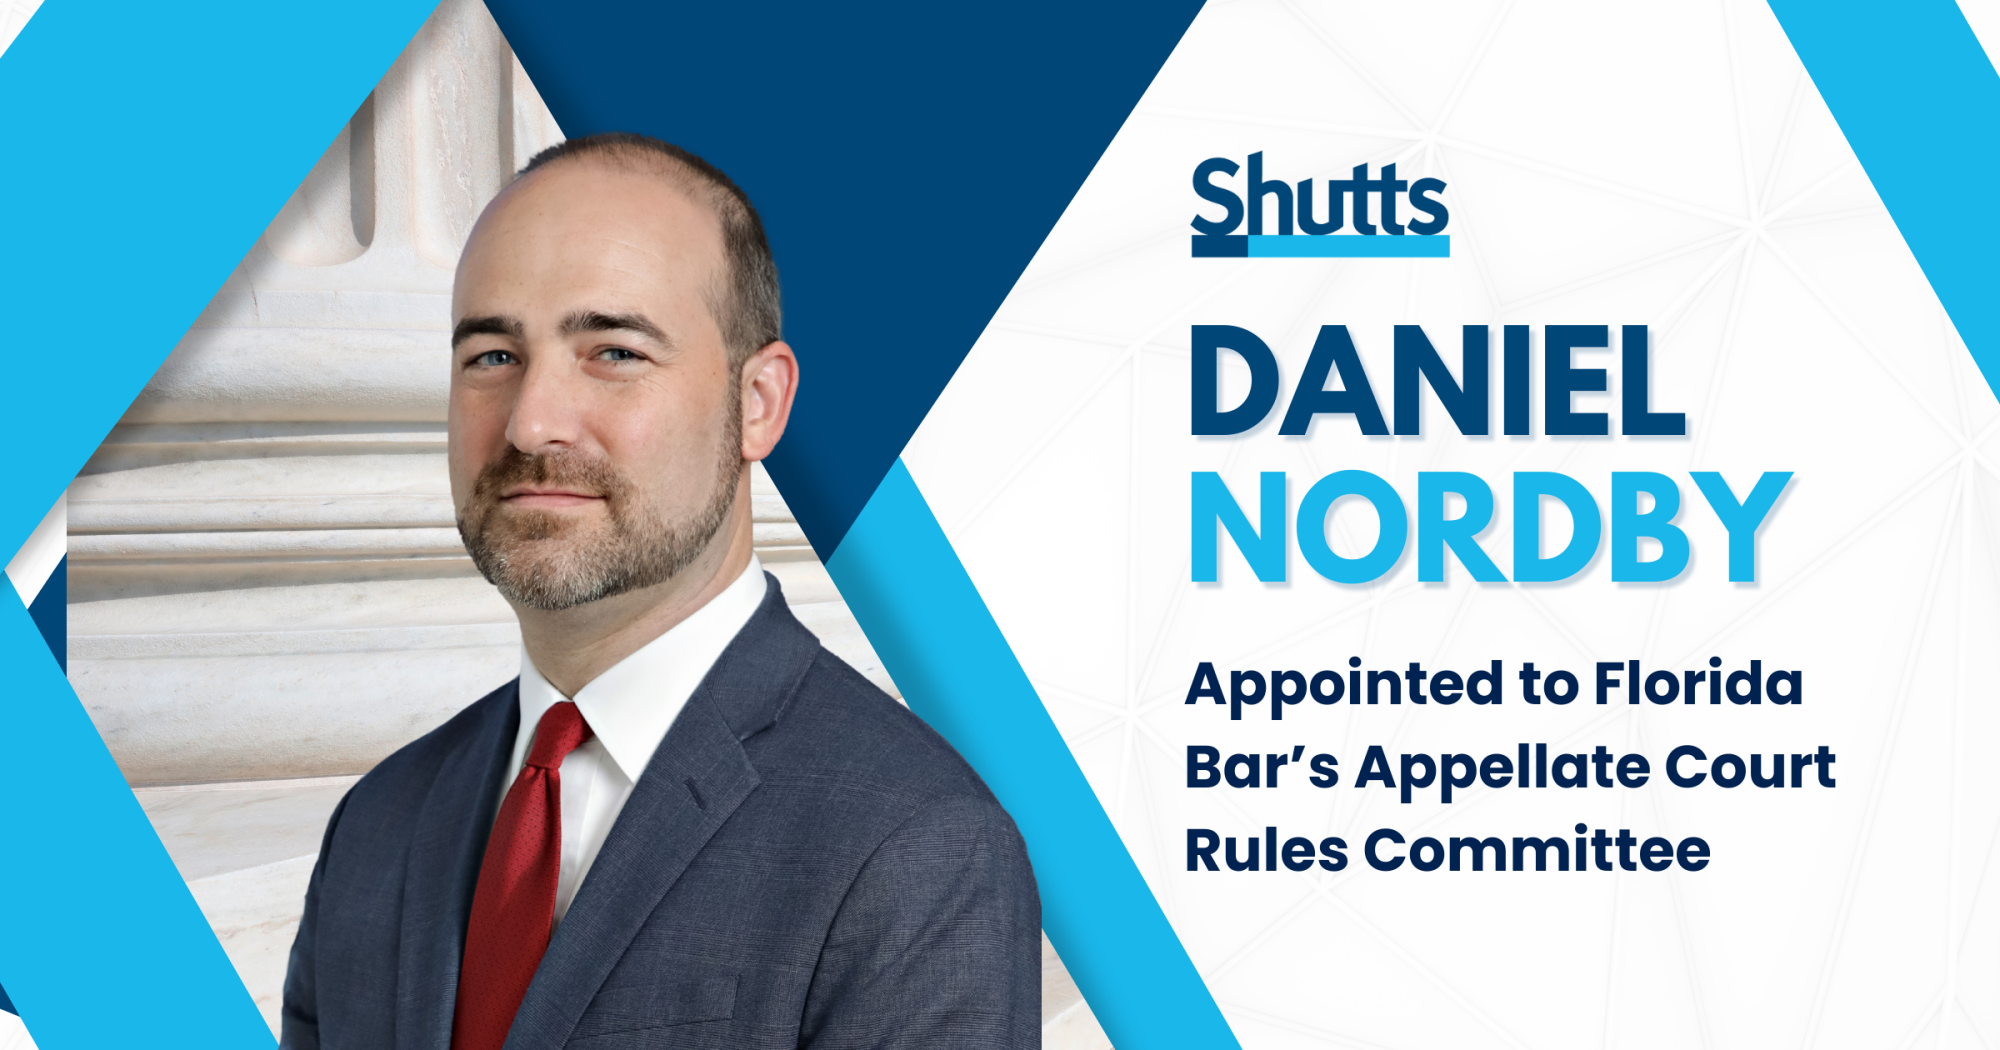 Daniel Nordby Appointed to Florida Bar’s Appellate Court Rules Committee